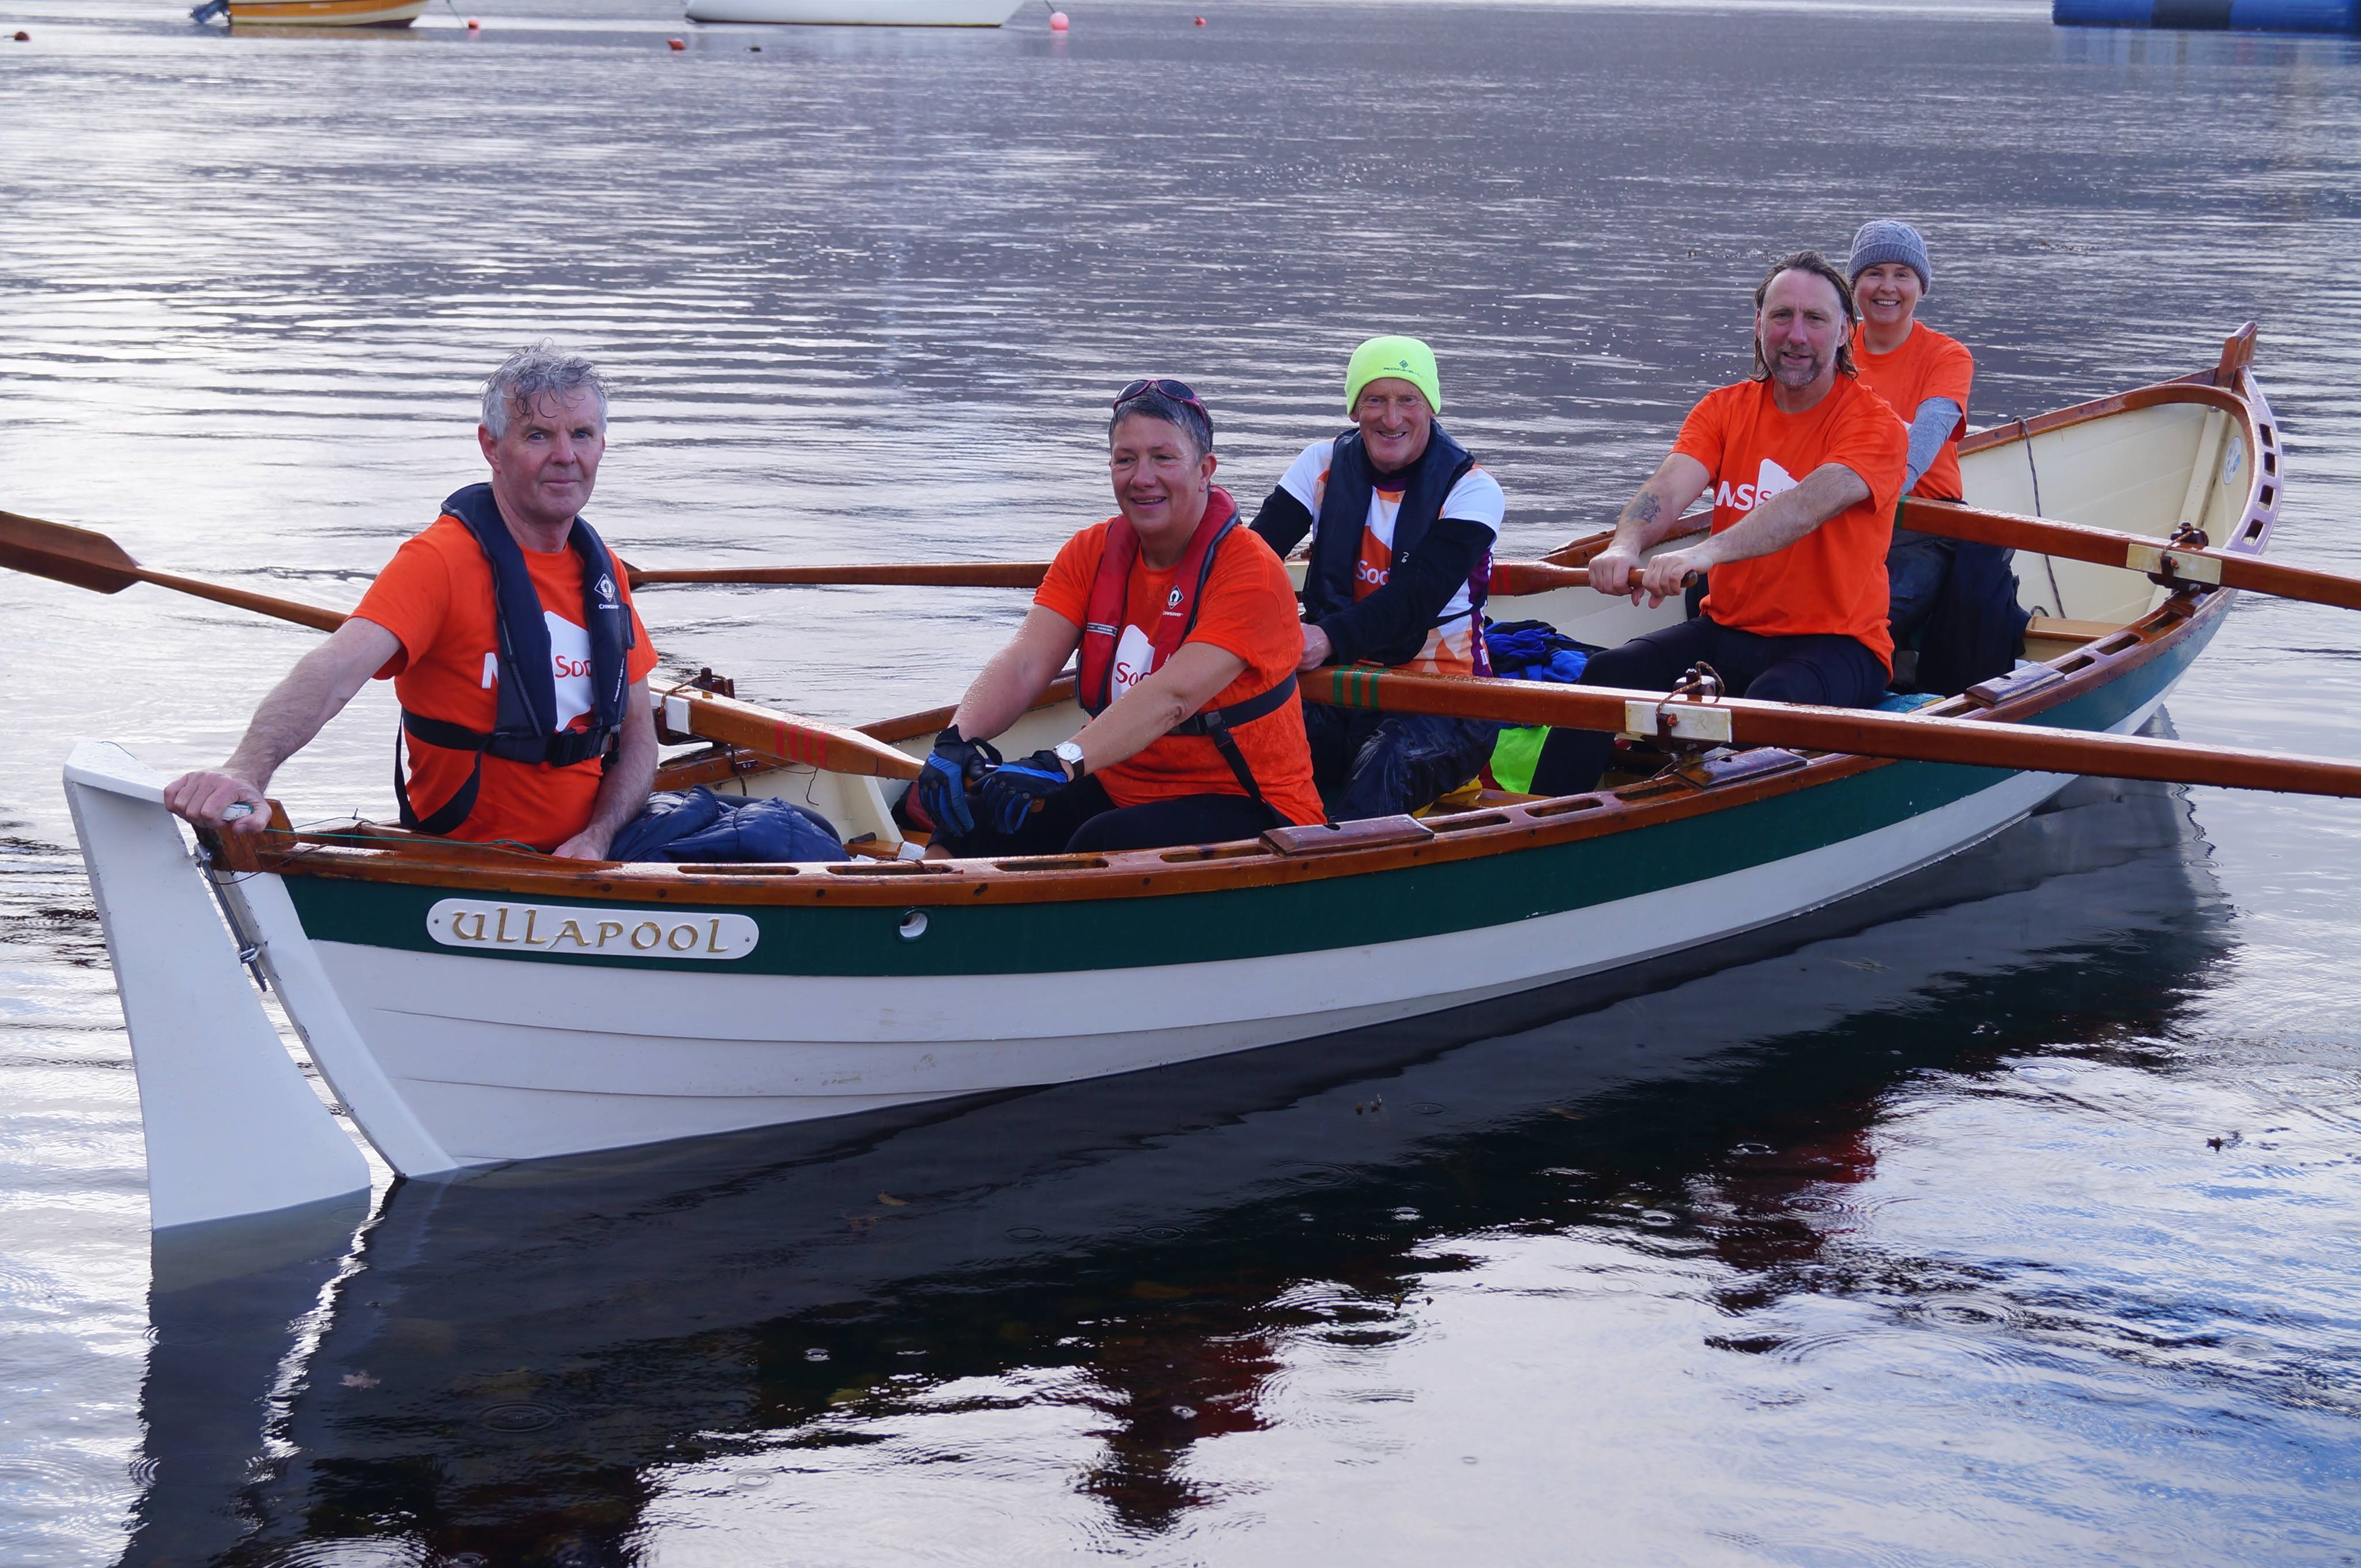 The ‘Rowing the Minch’ Crew: Kathryn Bennett, John Grant, Gary Lewis, Anthony O’Flaherty and Lorraine Thomson.